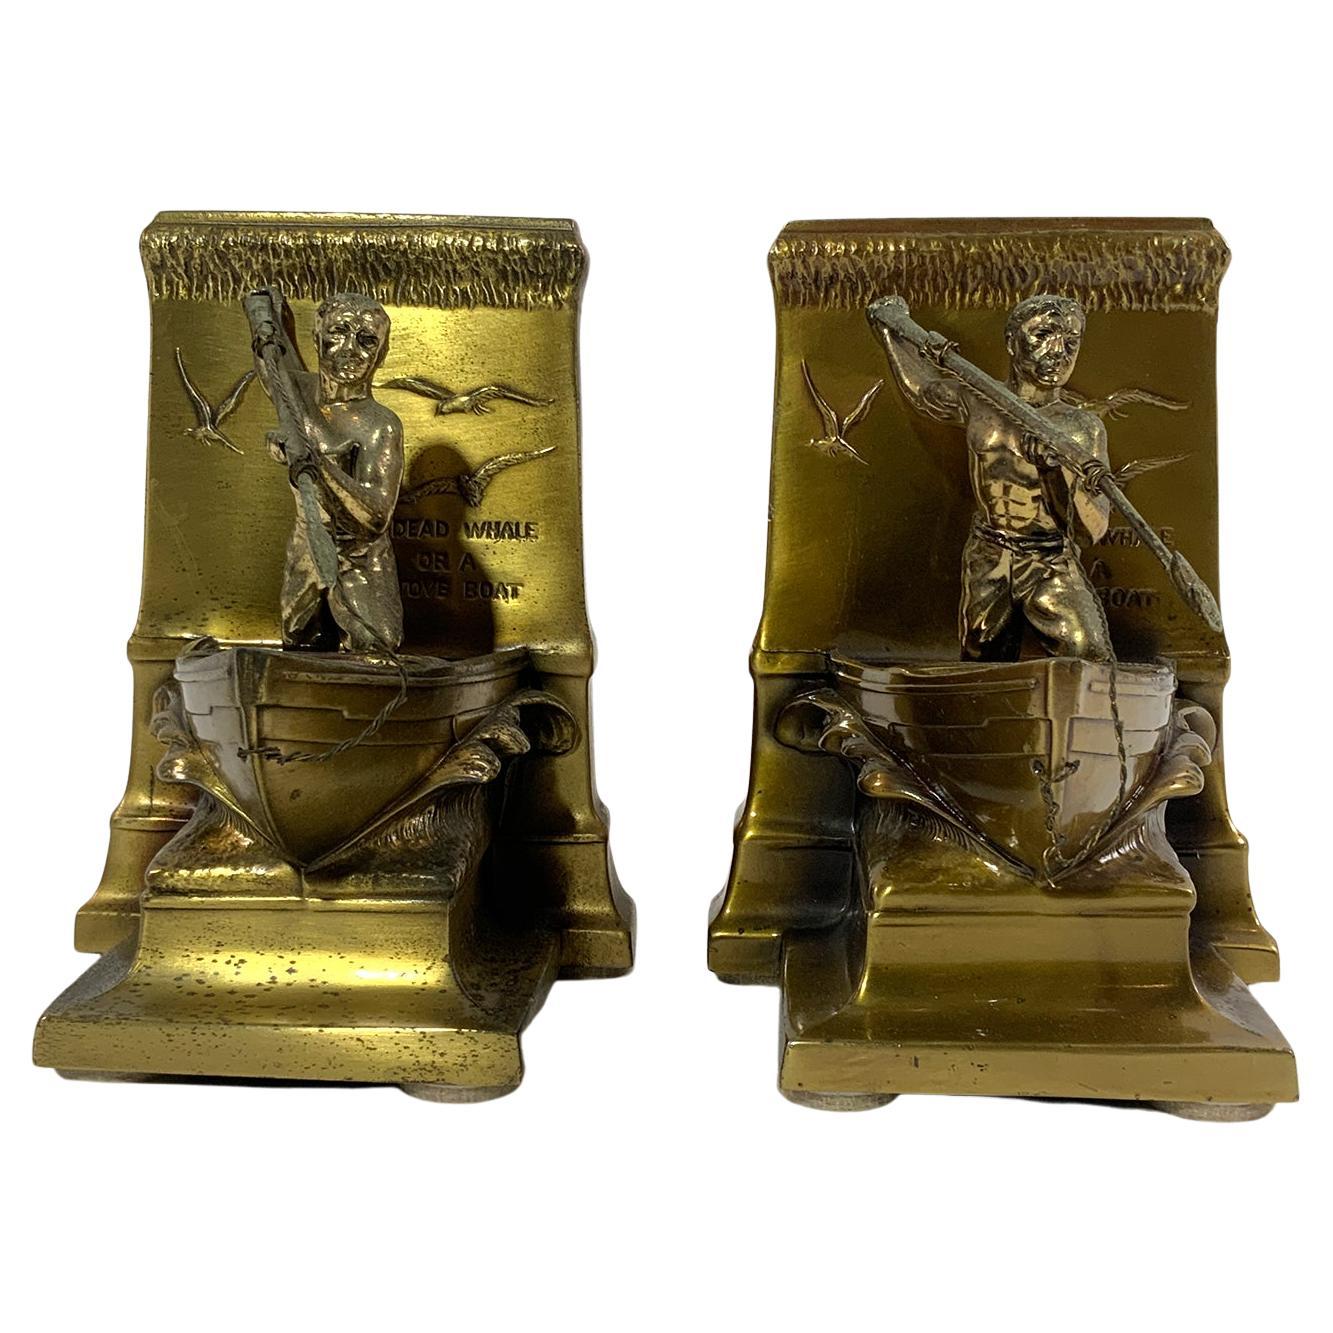 Whaleboat Bookends of Brass